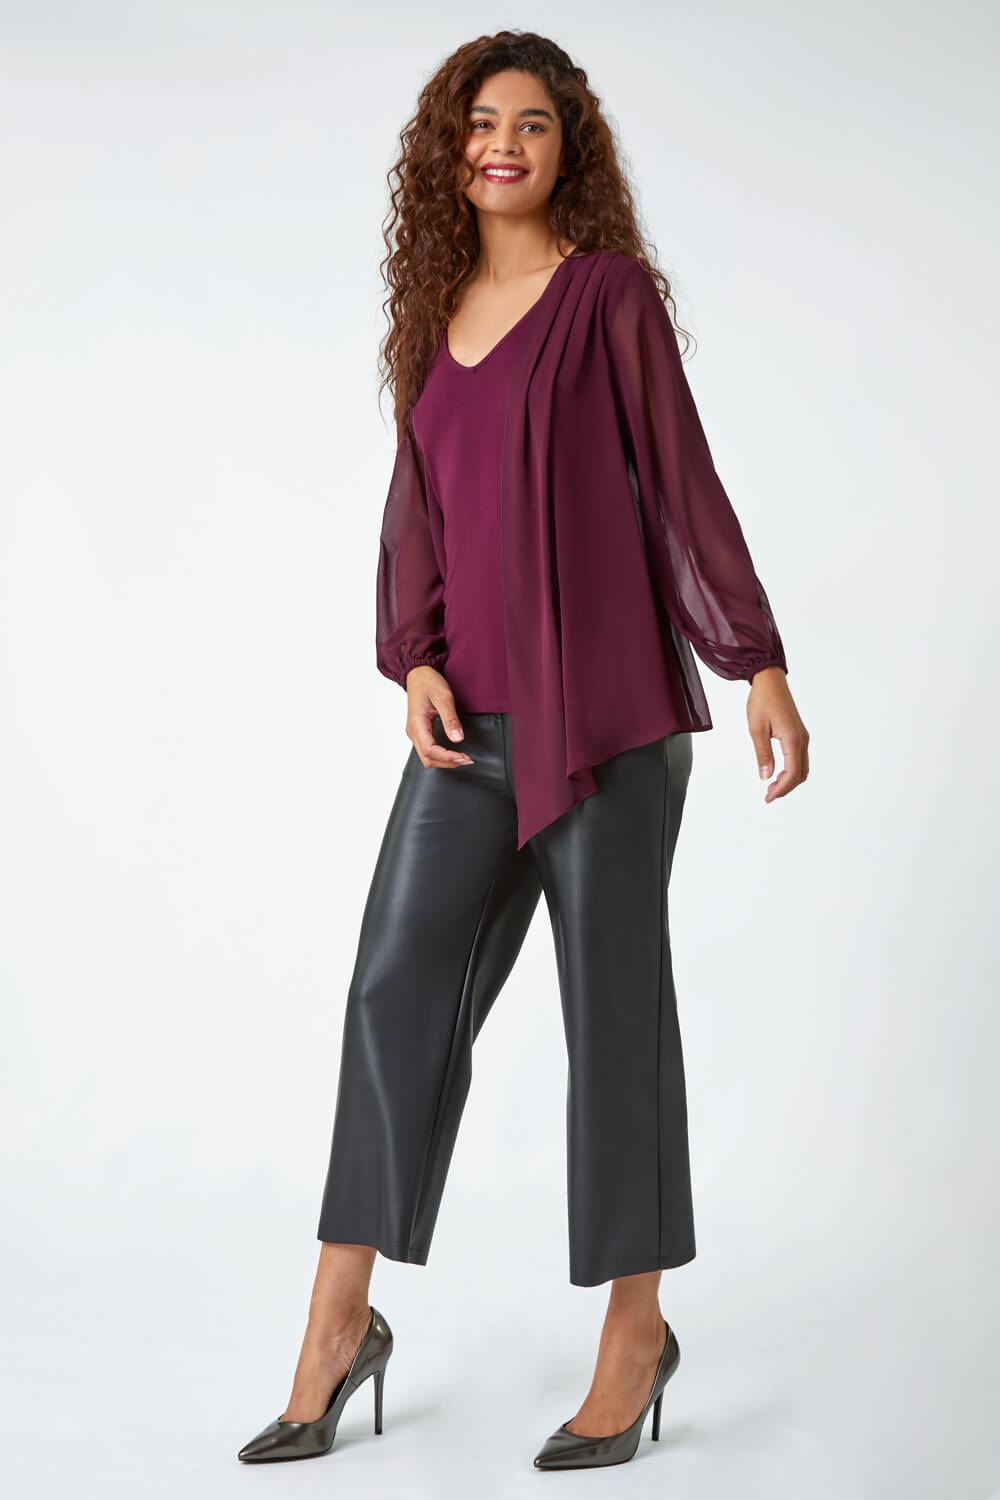 Wine Contrast Chiffon Overlay Stretch Top, Image 2 of 5